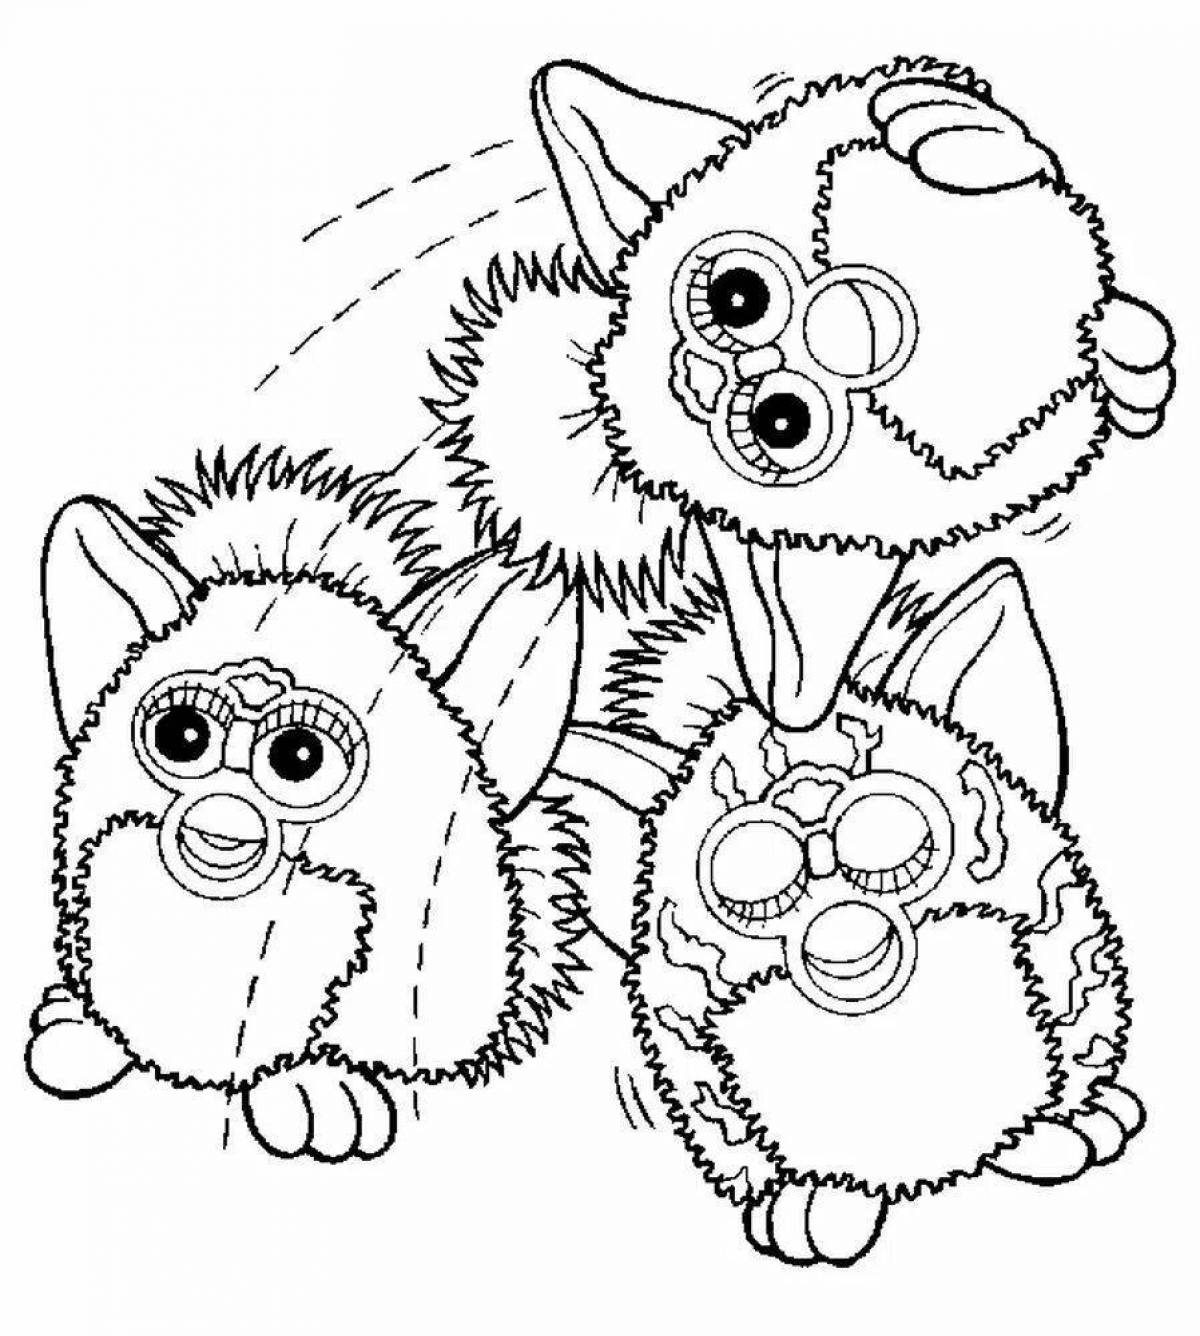 Live pussy coloring pages